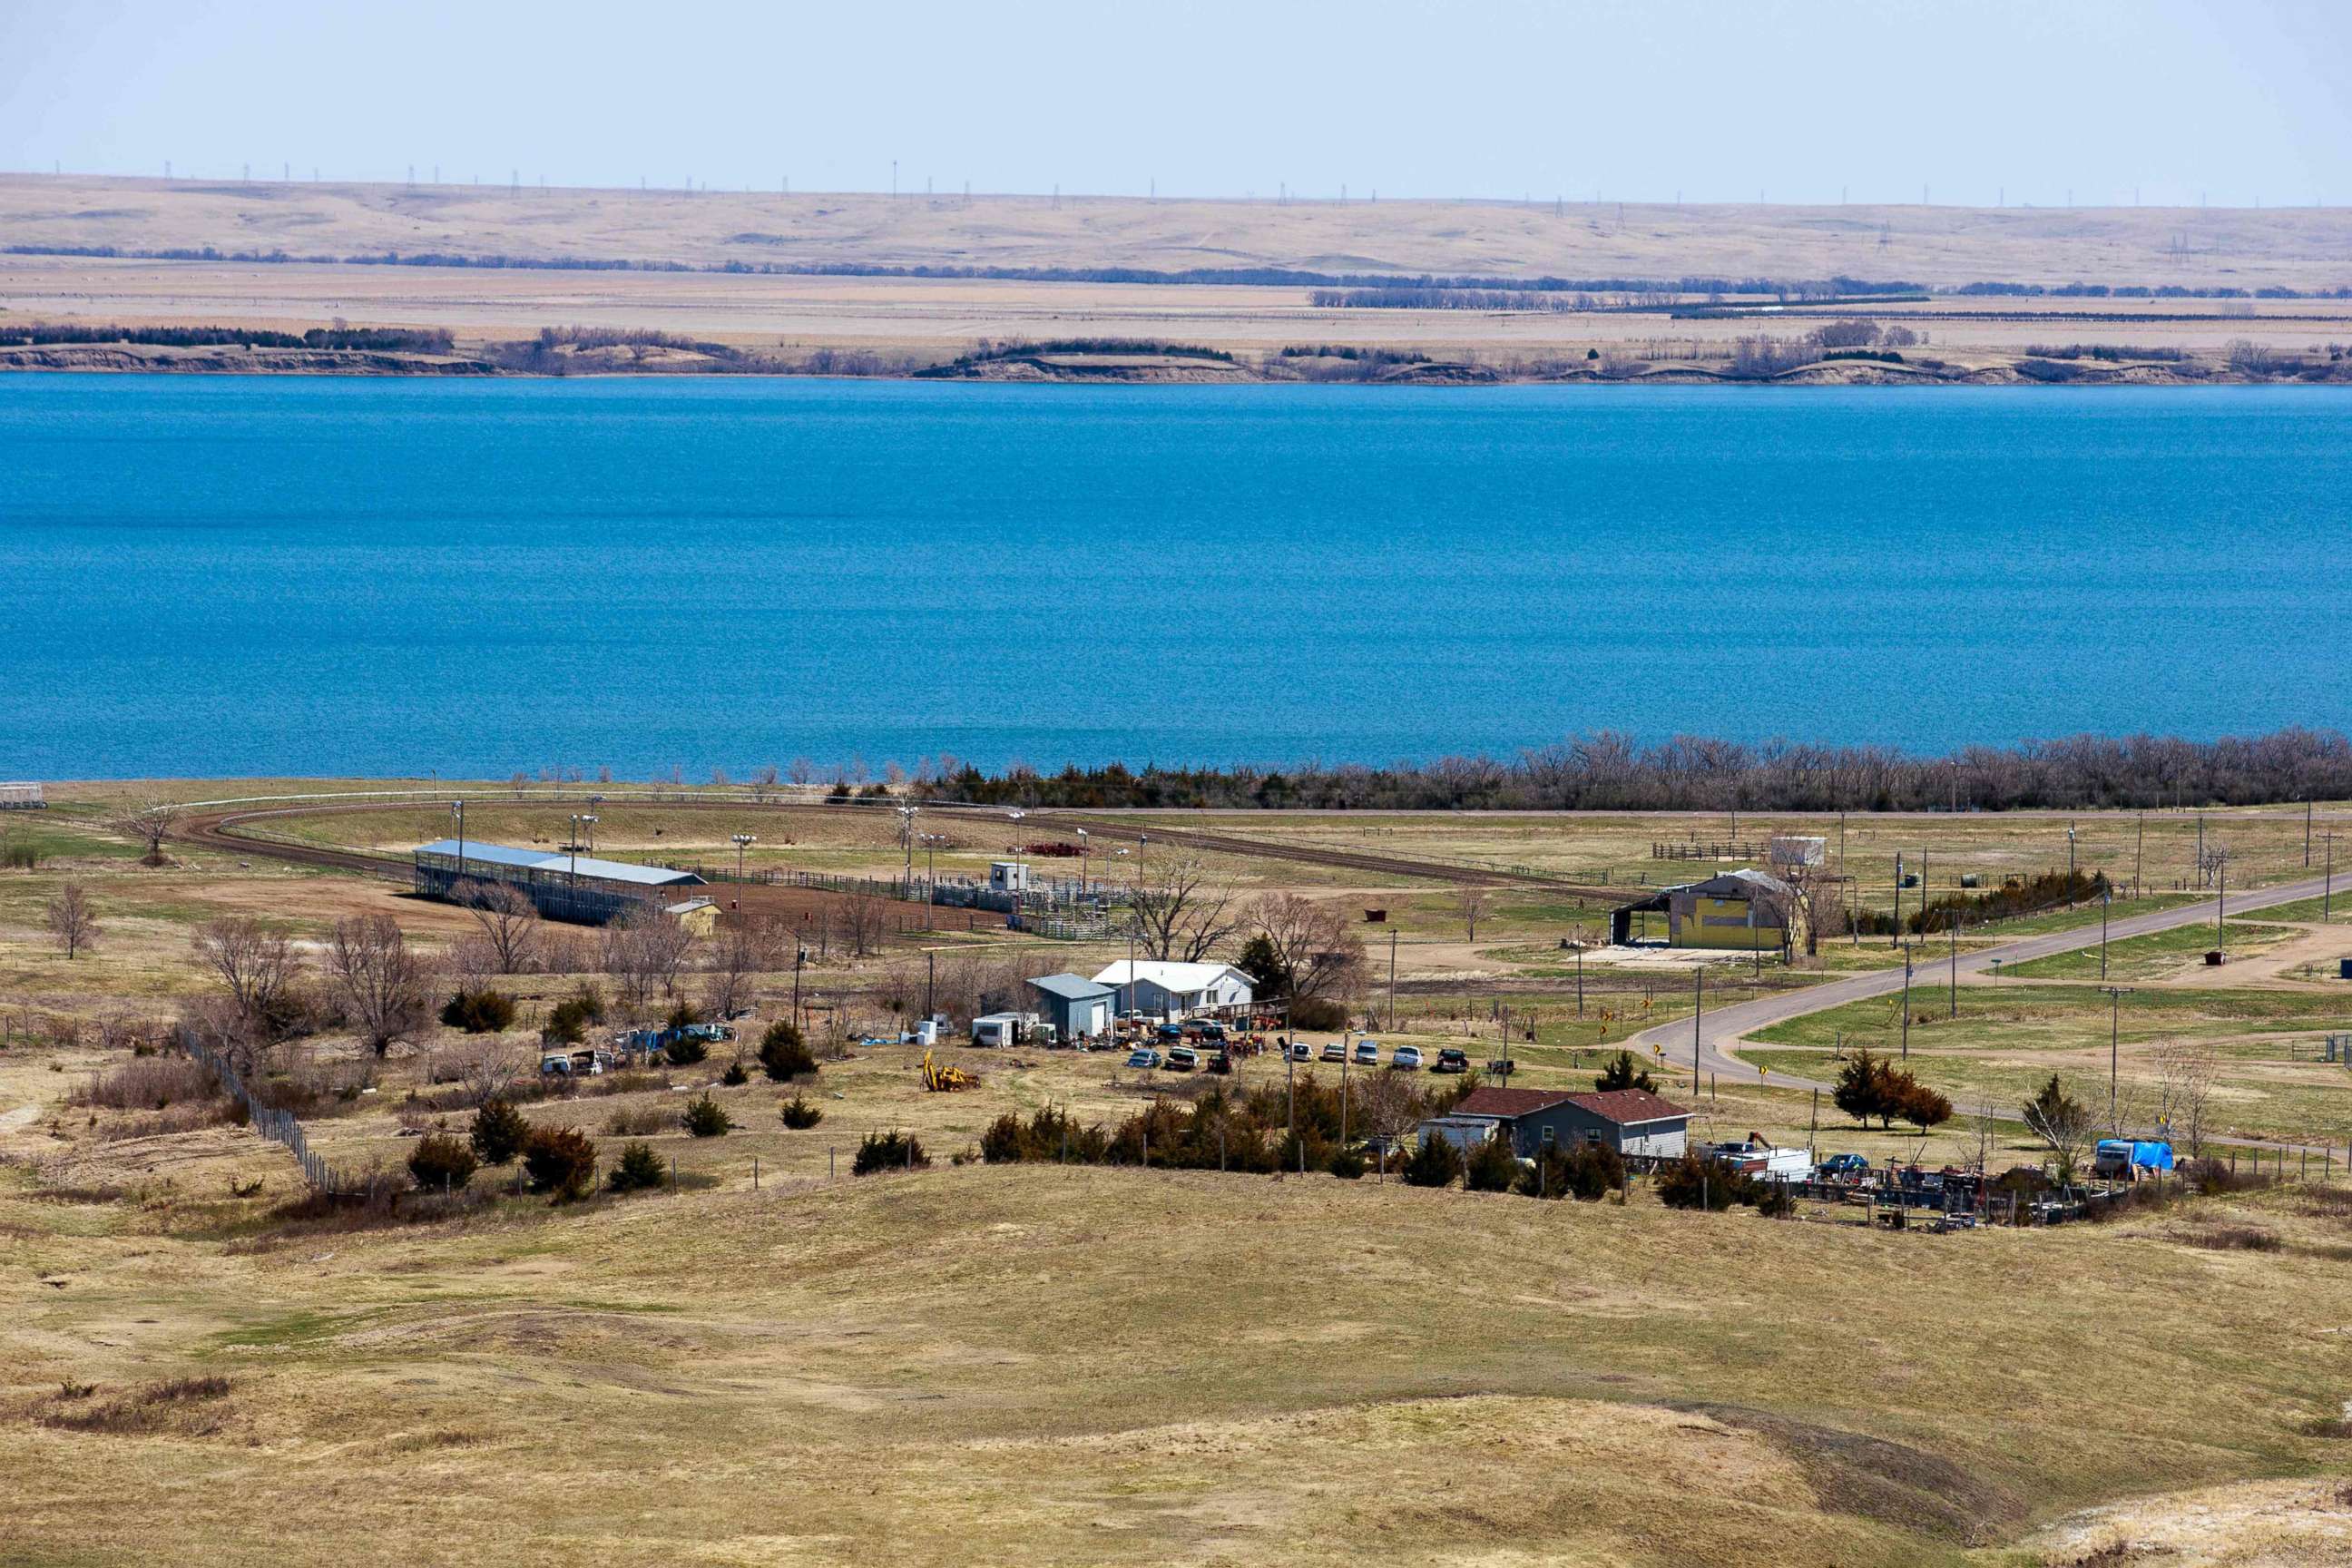 PHOTO: The Lower Brule Indian Reservation, with the Missouri River in the background, April 22, 2020 in Lower Brule, South Dakota.